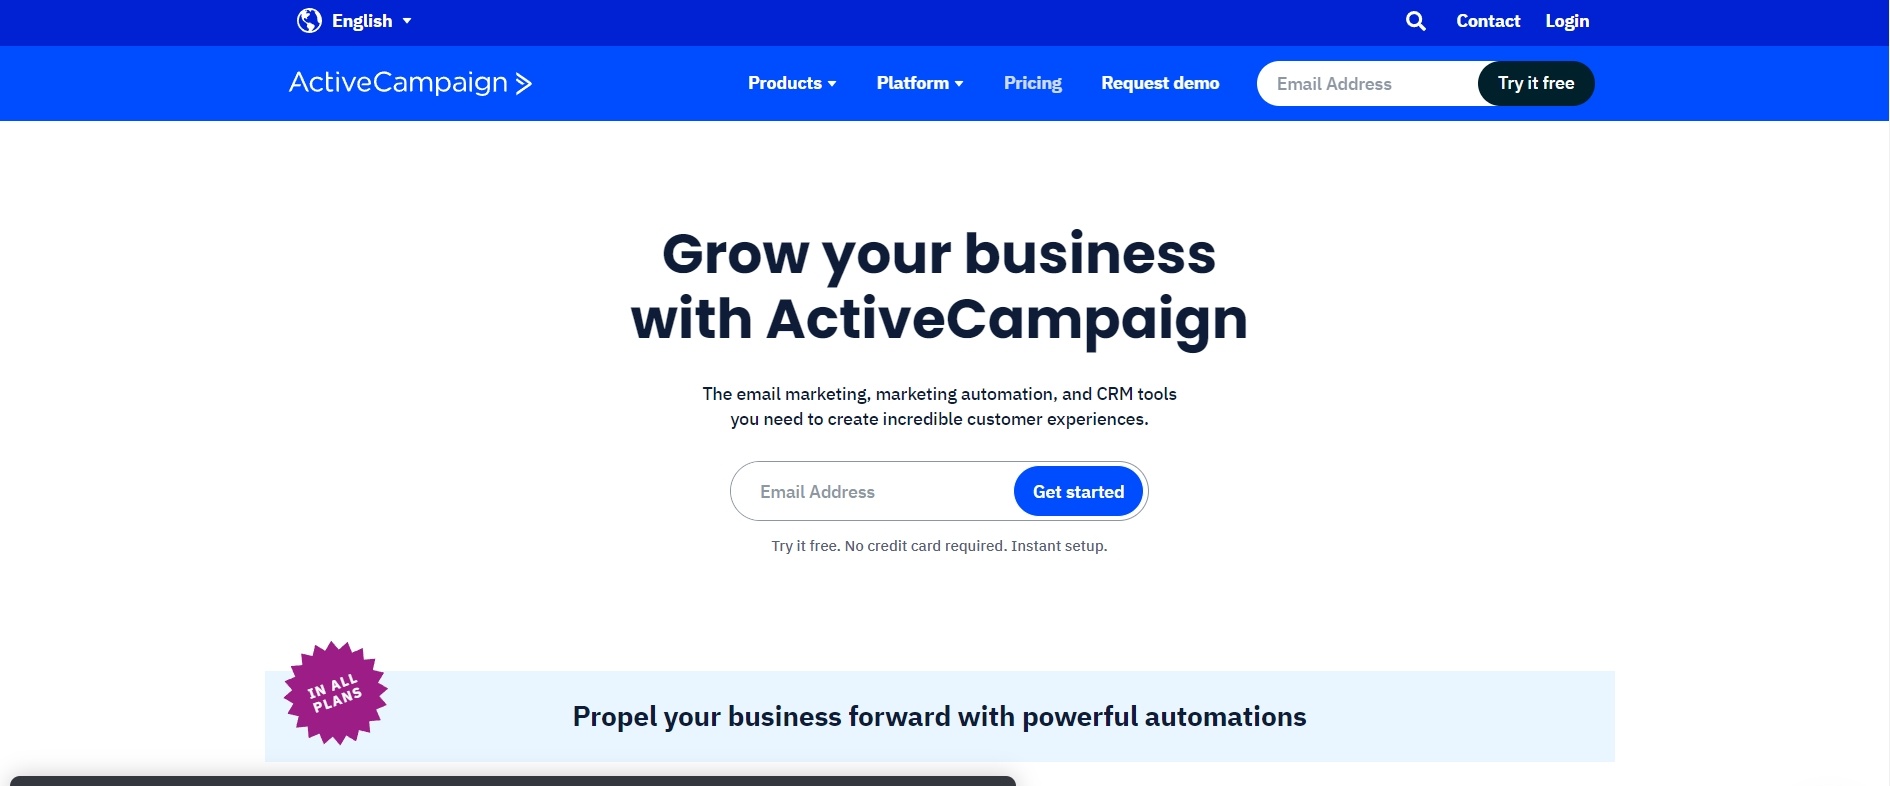 ActiveCampaign’s CRM with automation for email projects and campaigns